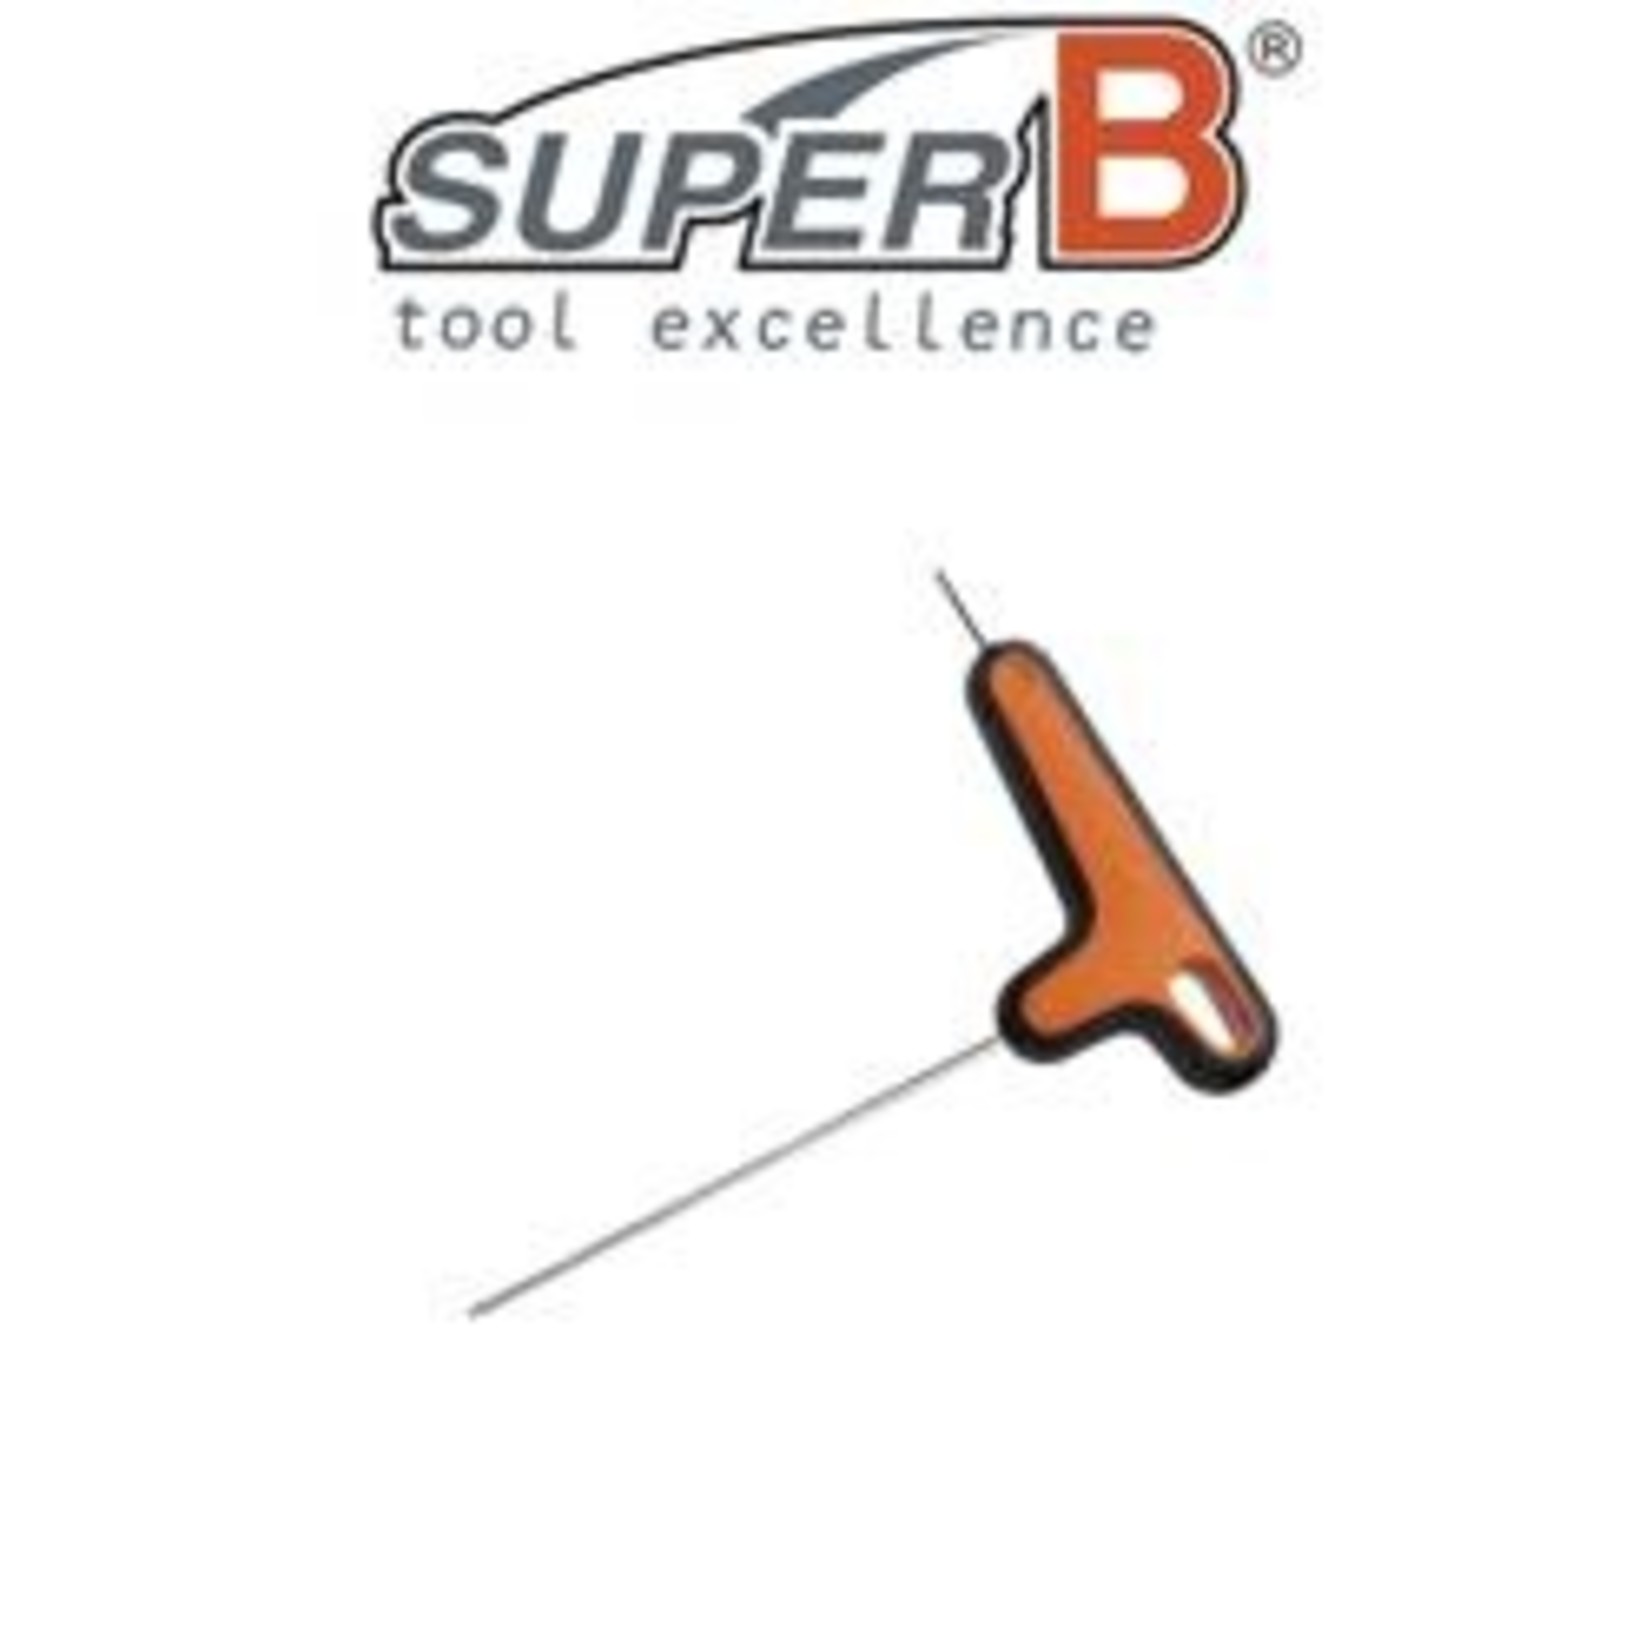 Super B SuperB T/L Handle Hex Wrench - 2mm - Made of S2 Steel - Bike Tool